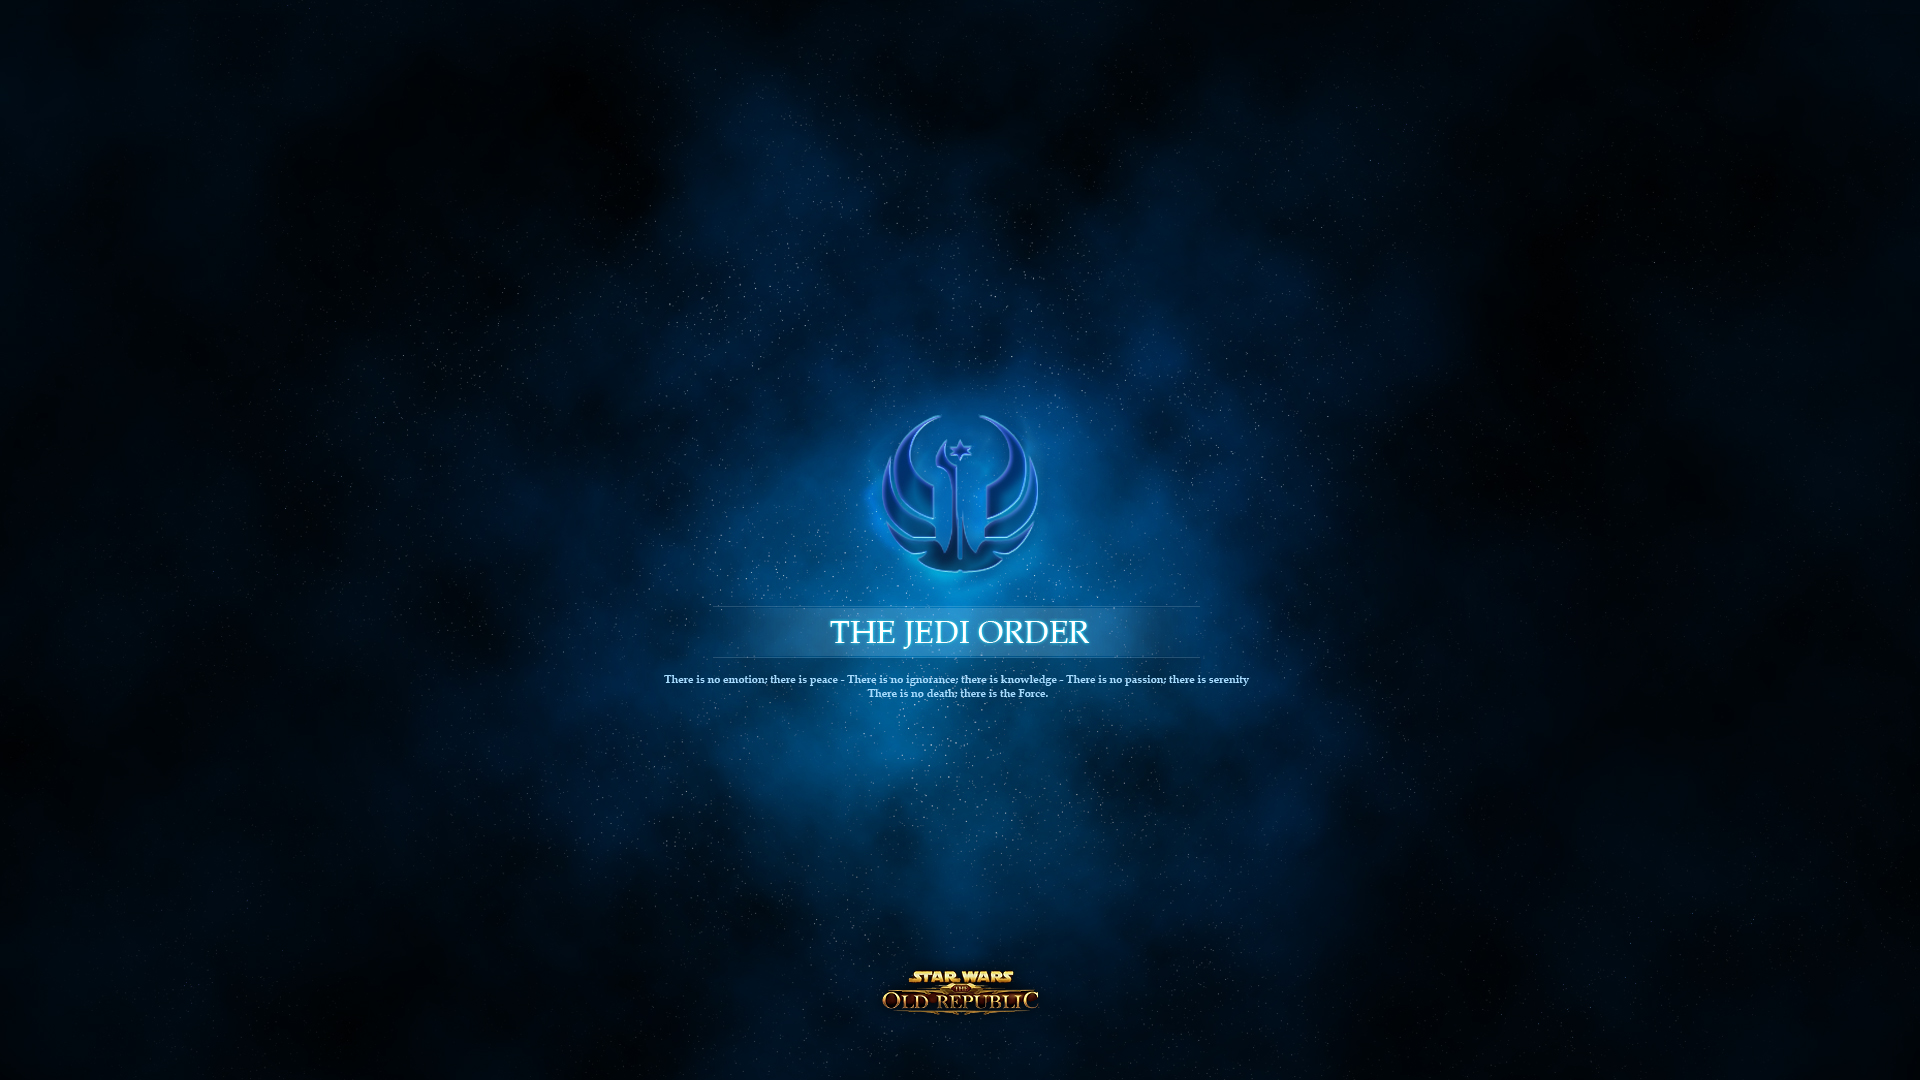 Video Game Star Wars The Old Republic 1920x1080